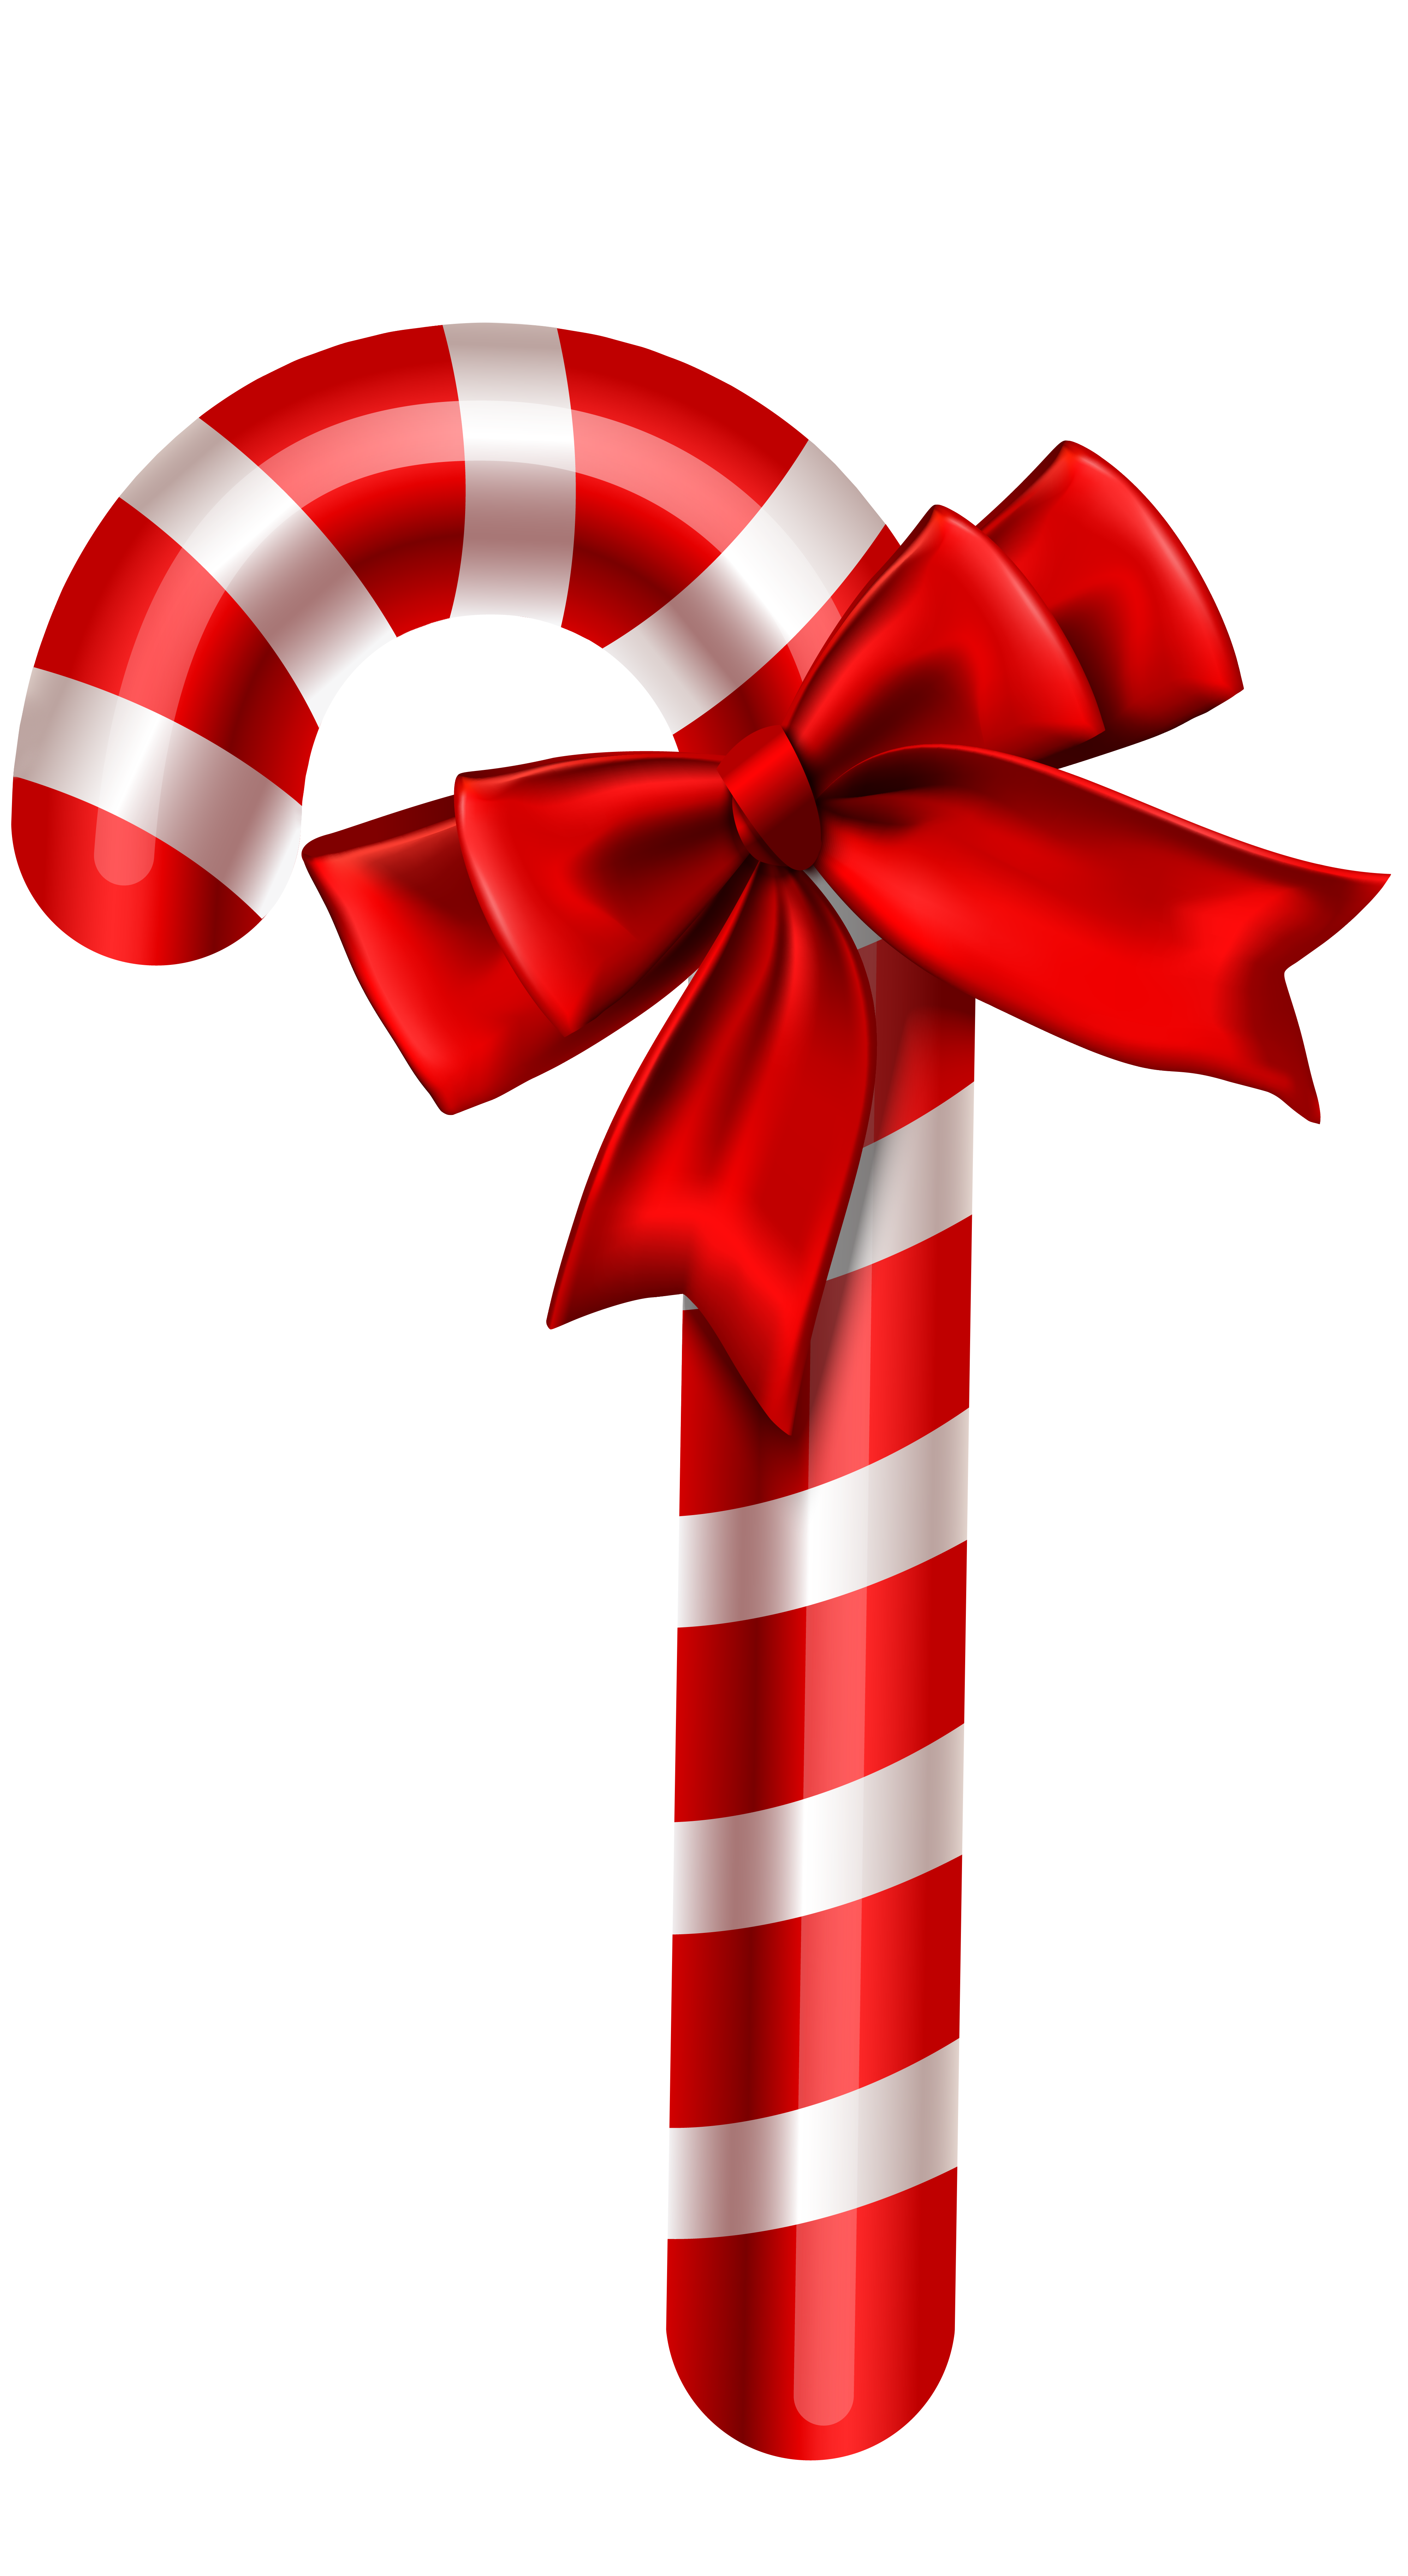 Candy Cane Christmas Ornament PNG Clipart Image​ | Gallery ...